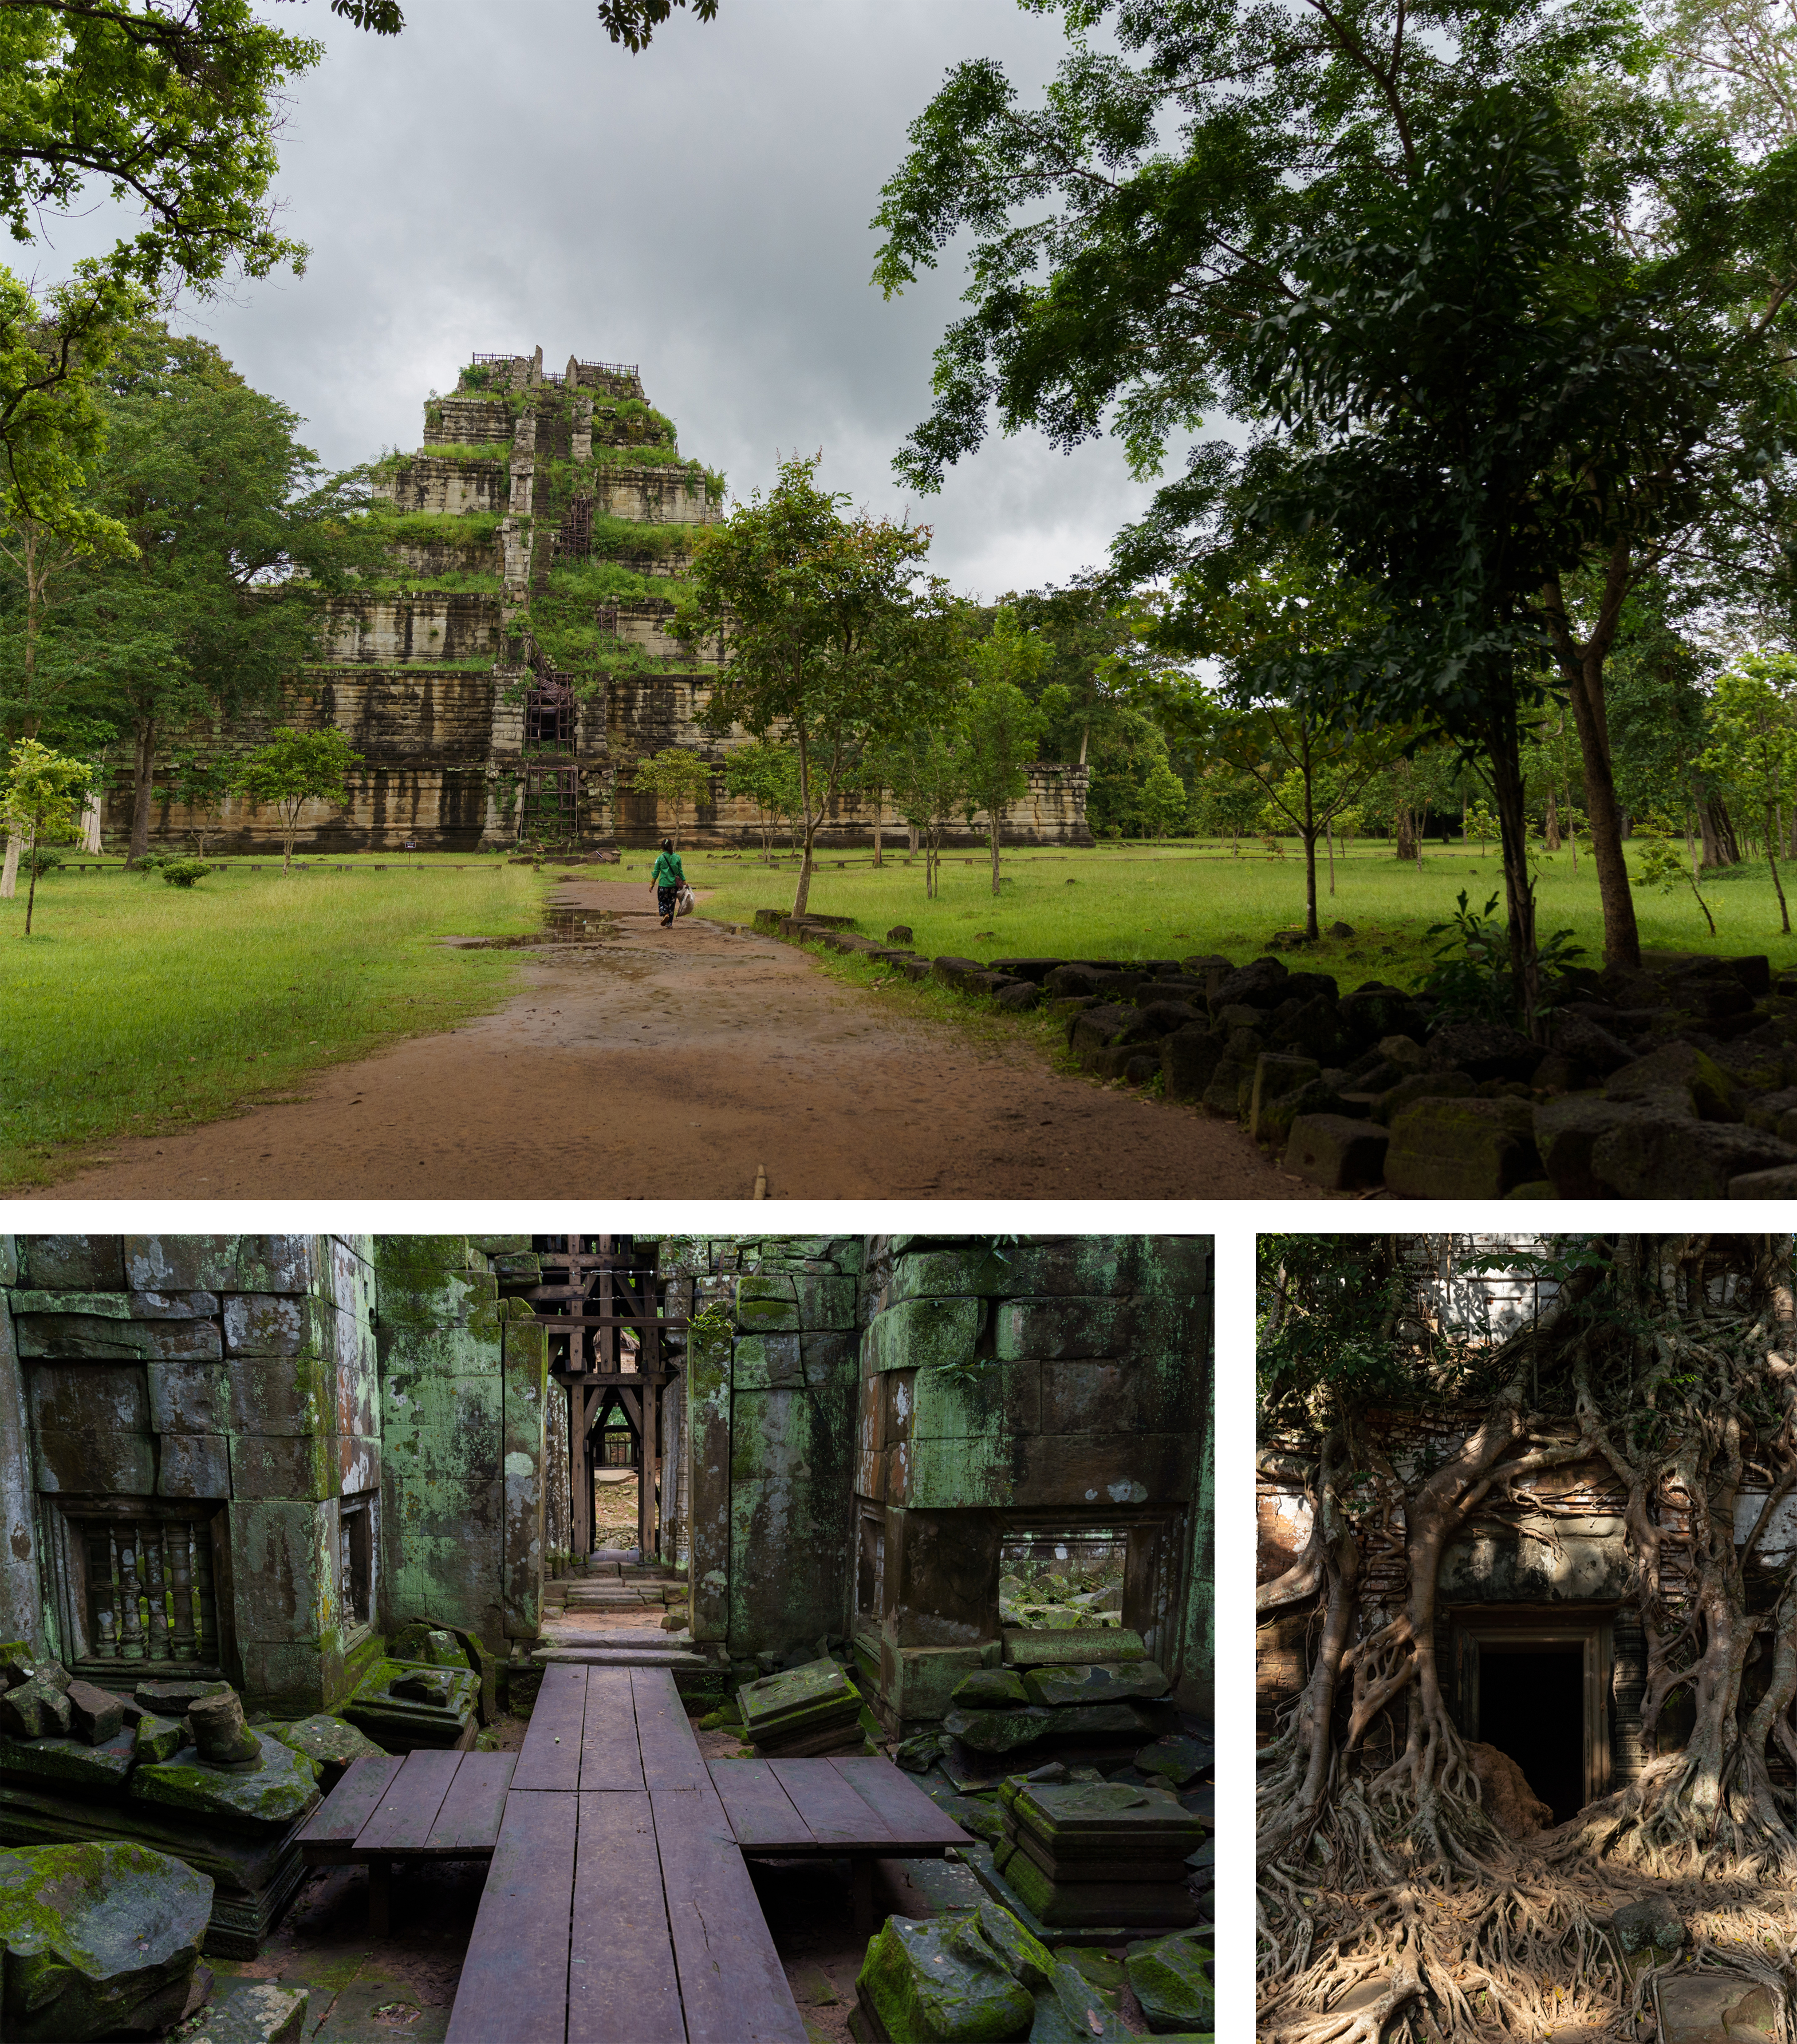 TOP: A visitor approaches the seven??'tiered pyramid of Prasat Thom at Koh Ker in Cambodia on Aug. 10, 2022. BOTTOM LEFT: One of the chambers at the Prasat Thom temple in Koh Ker is pictured that same day with several pedestals of missing statues that were likely looted. BOTTOM RIGHT: Trees grow over a structure at Prasat Pram in Koh Ker on Oct. 26, 2019. (Photos by Thomas Cristofoletti/Special to The Denver Post)